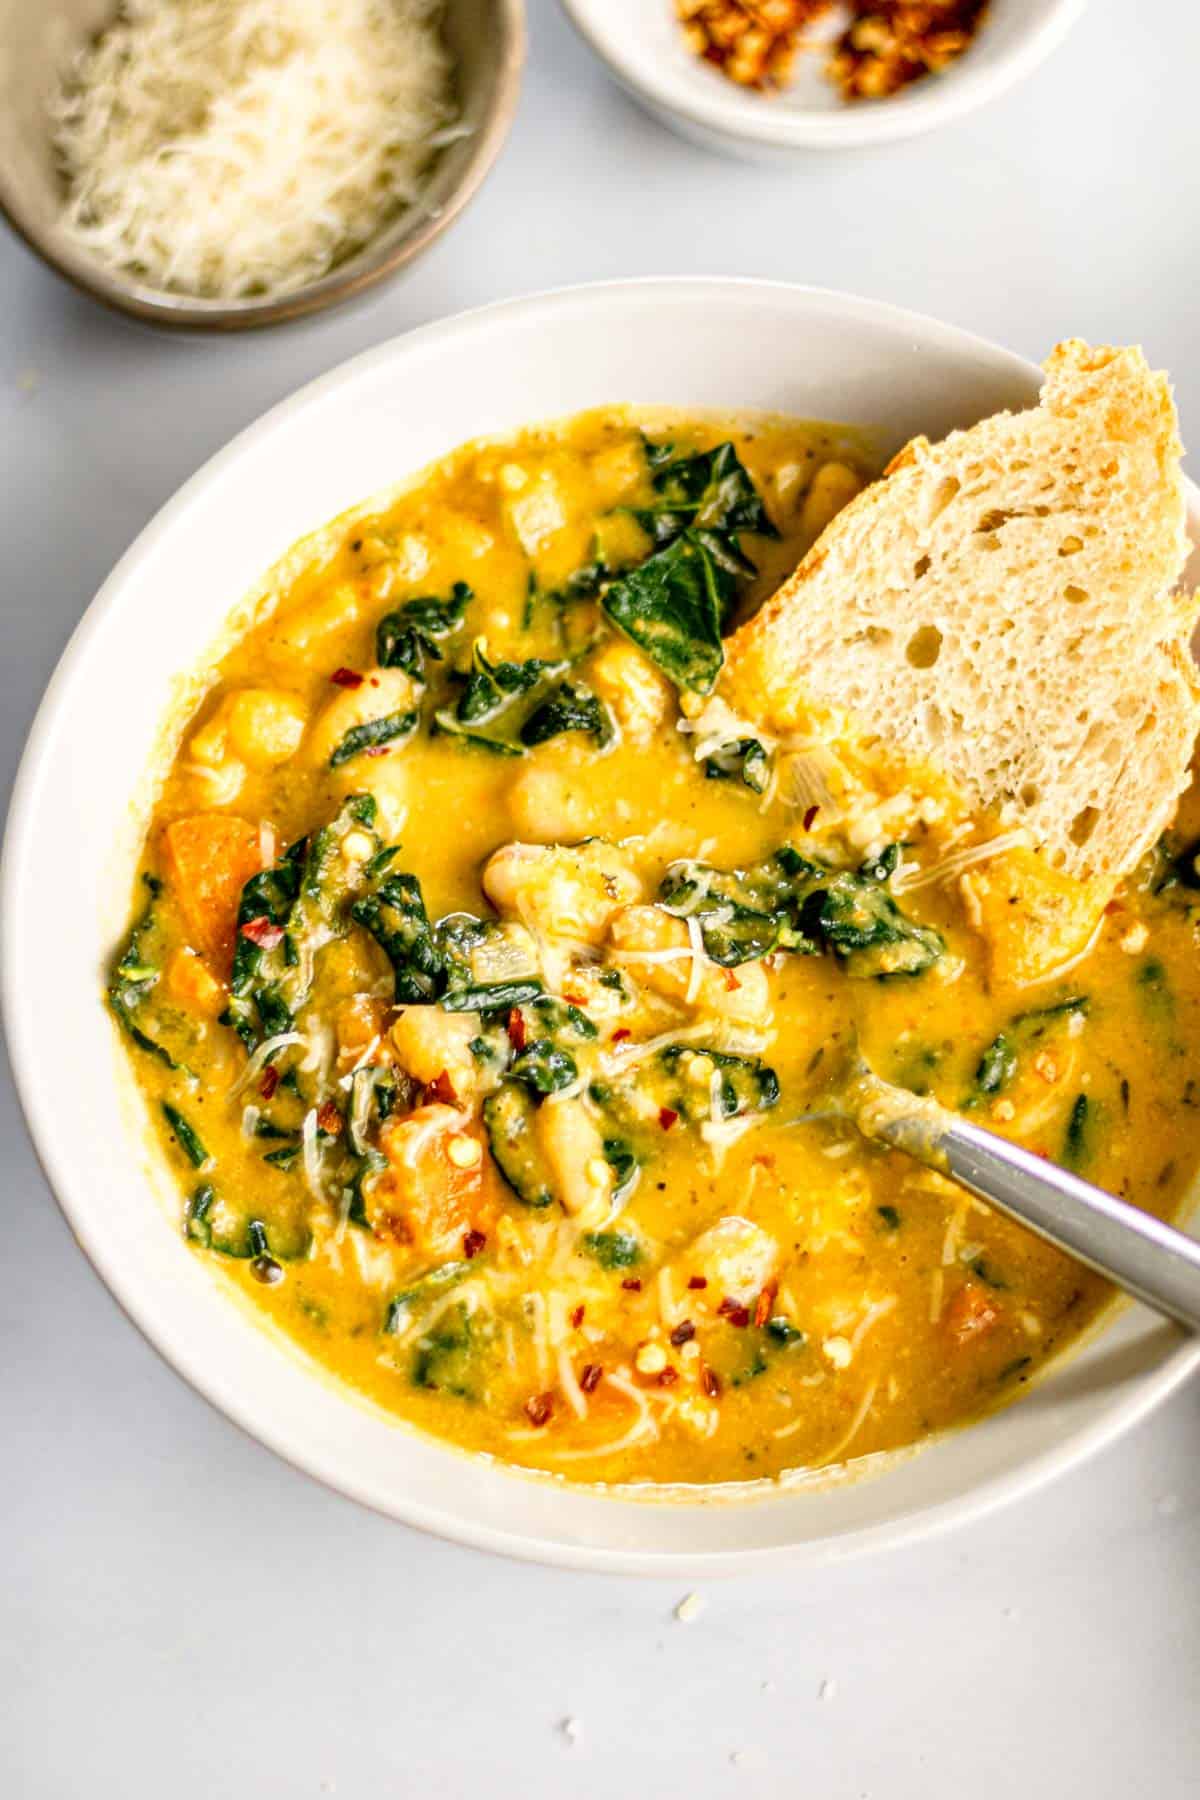 Creamy Tuscan White Bean Soup with kale served with fresh bread.